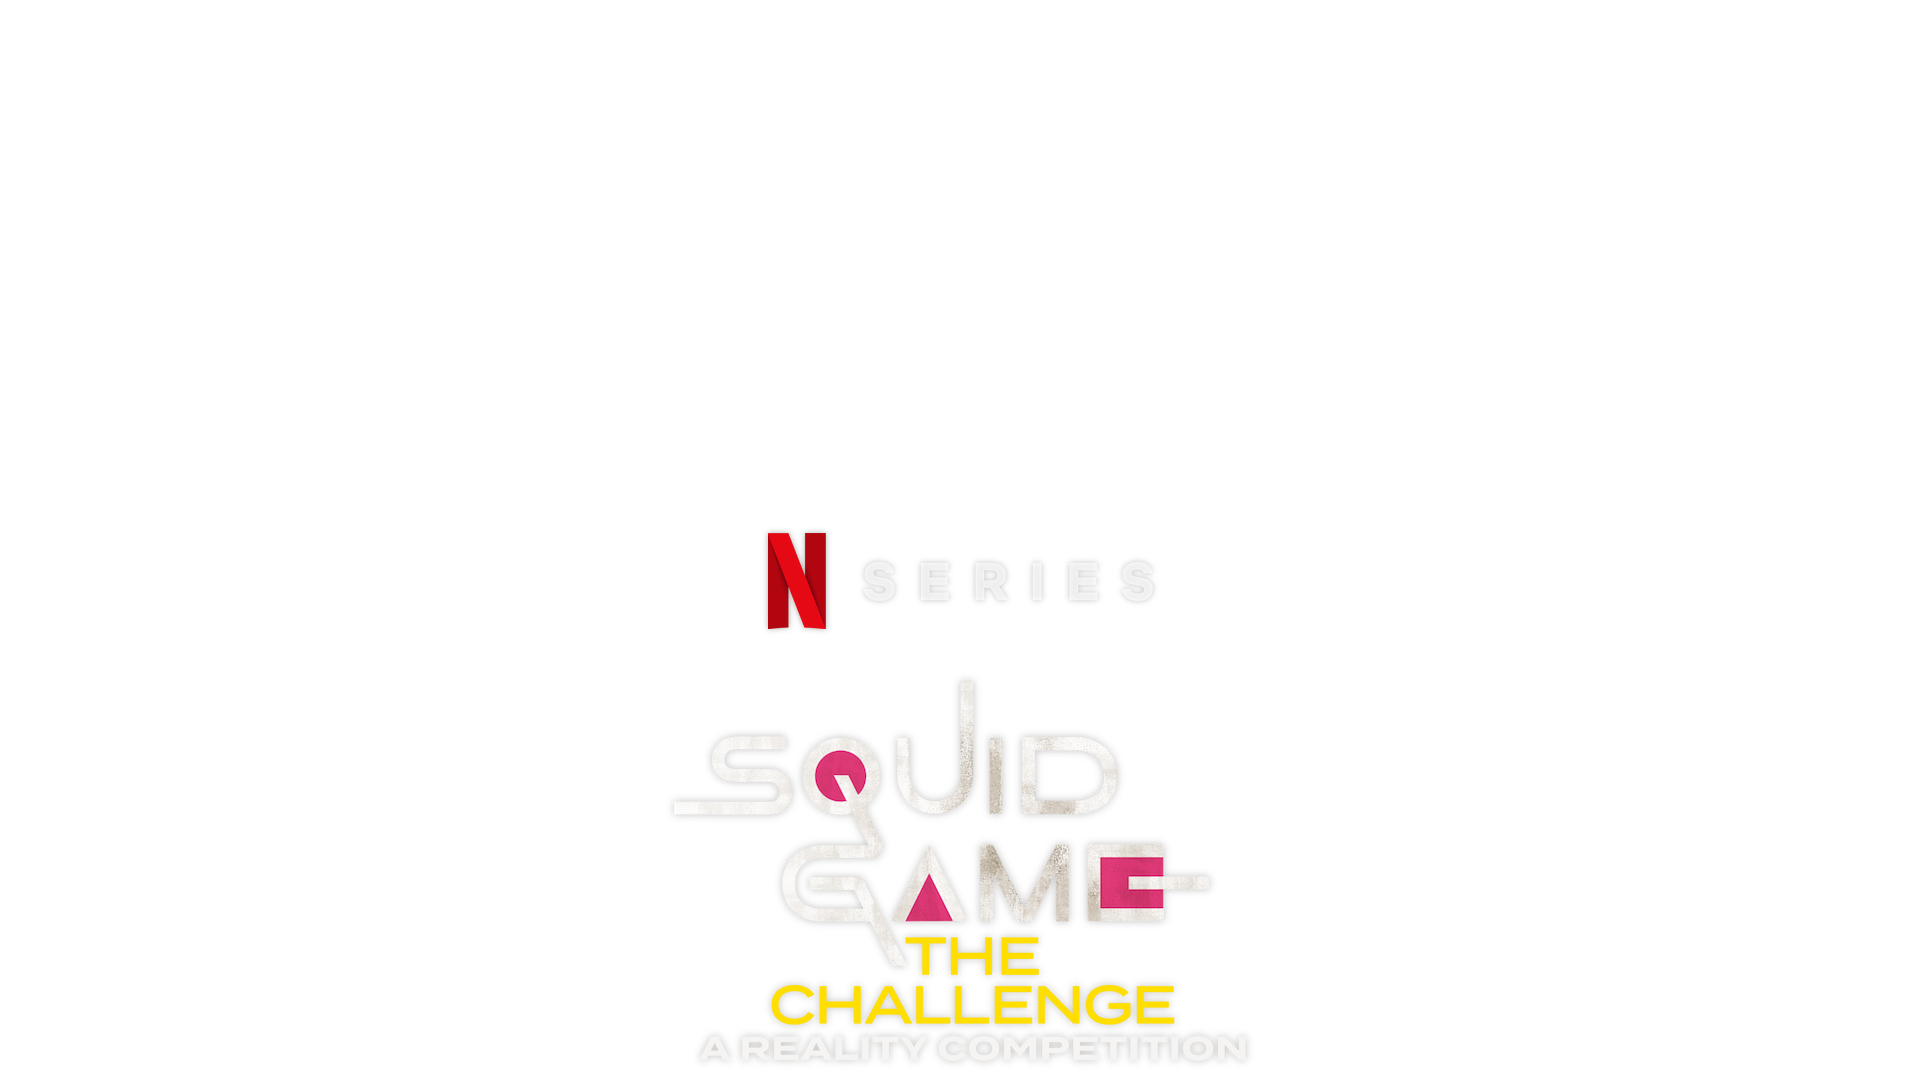 Squid Challenge  Play Now Online for Free 